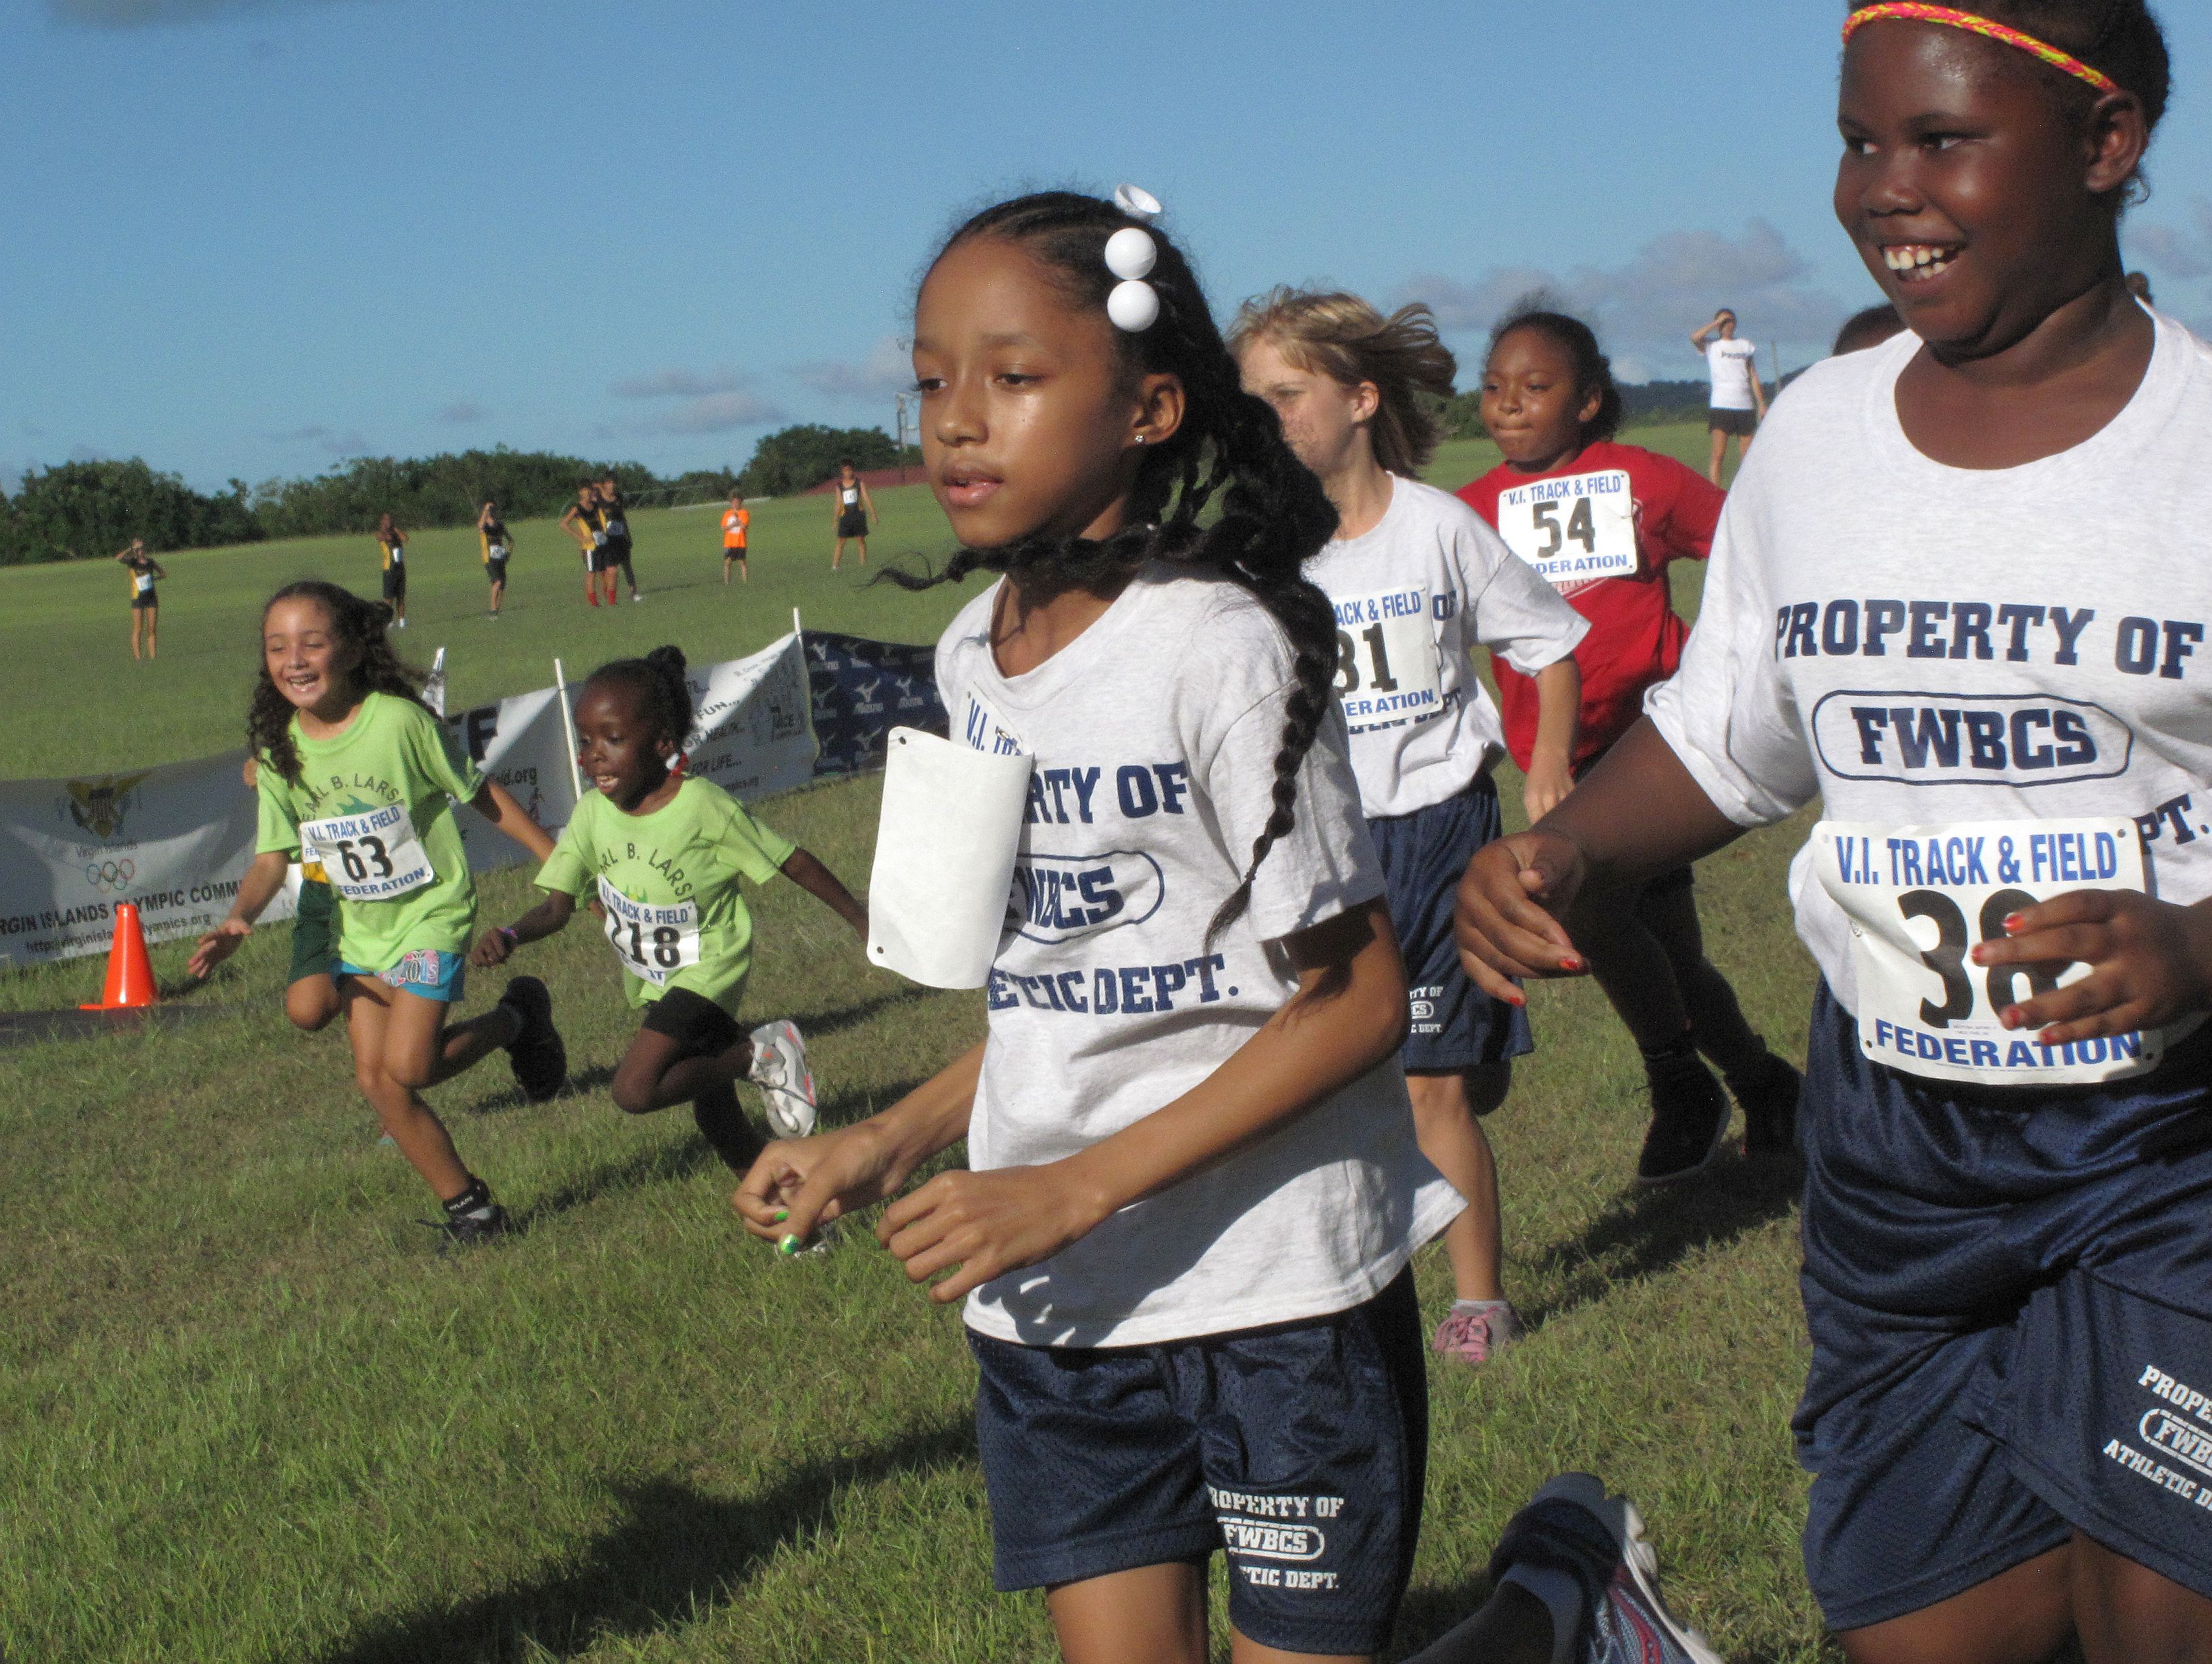 Elementary school girls competing in 4H/V.I.Pace Runners Cross-Country Series